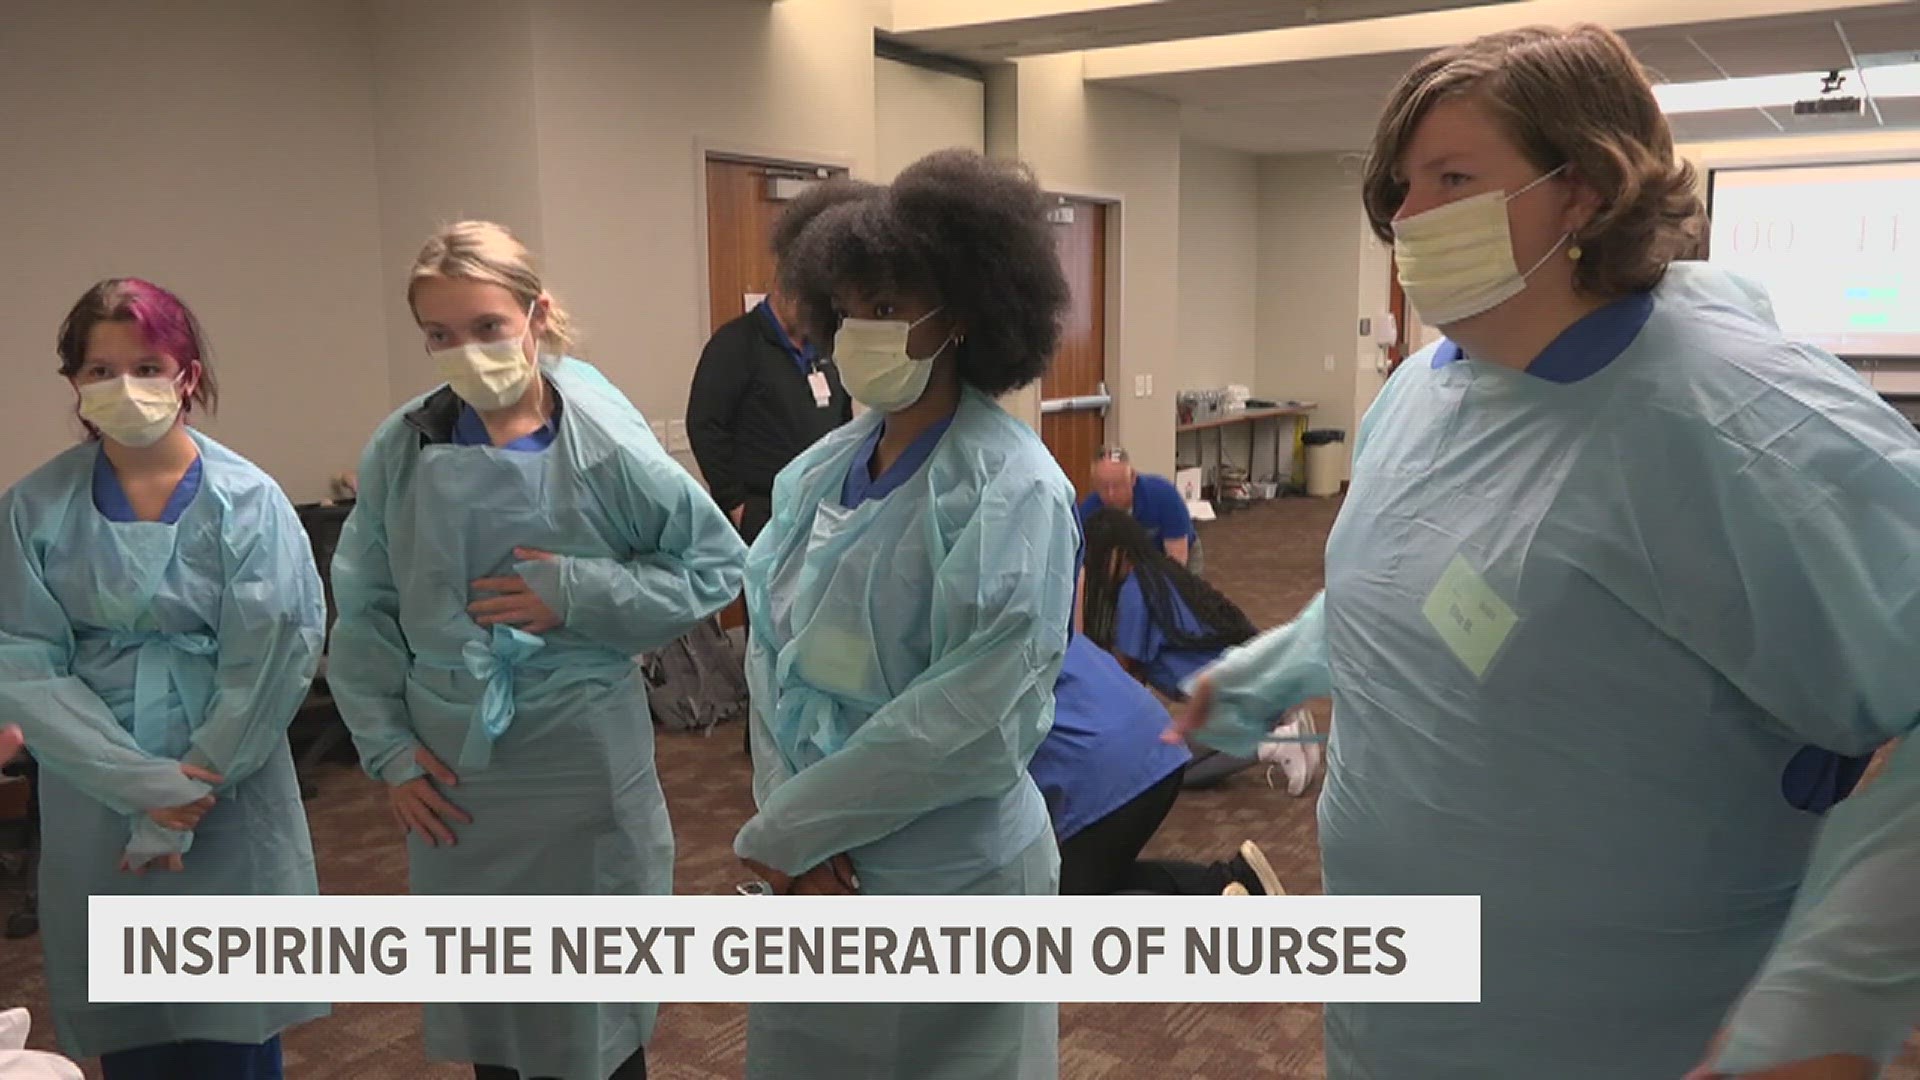 The Genesis Adventures in Nursing Program allows younger students to participate in hands-on exercises and learn more about the world of nursing.